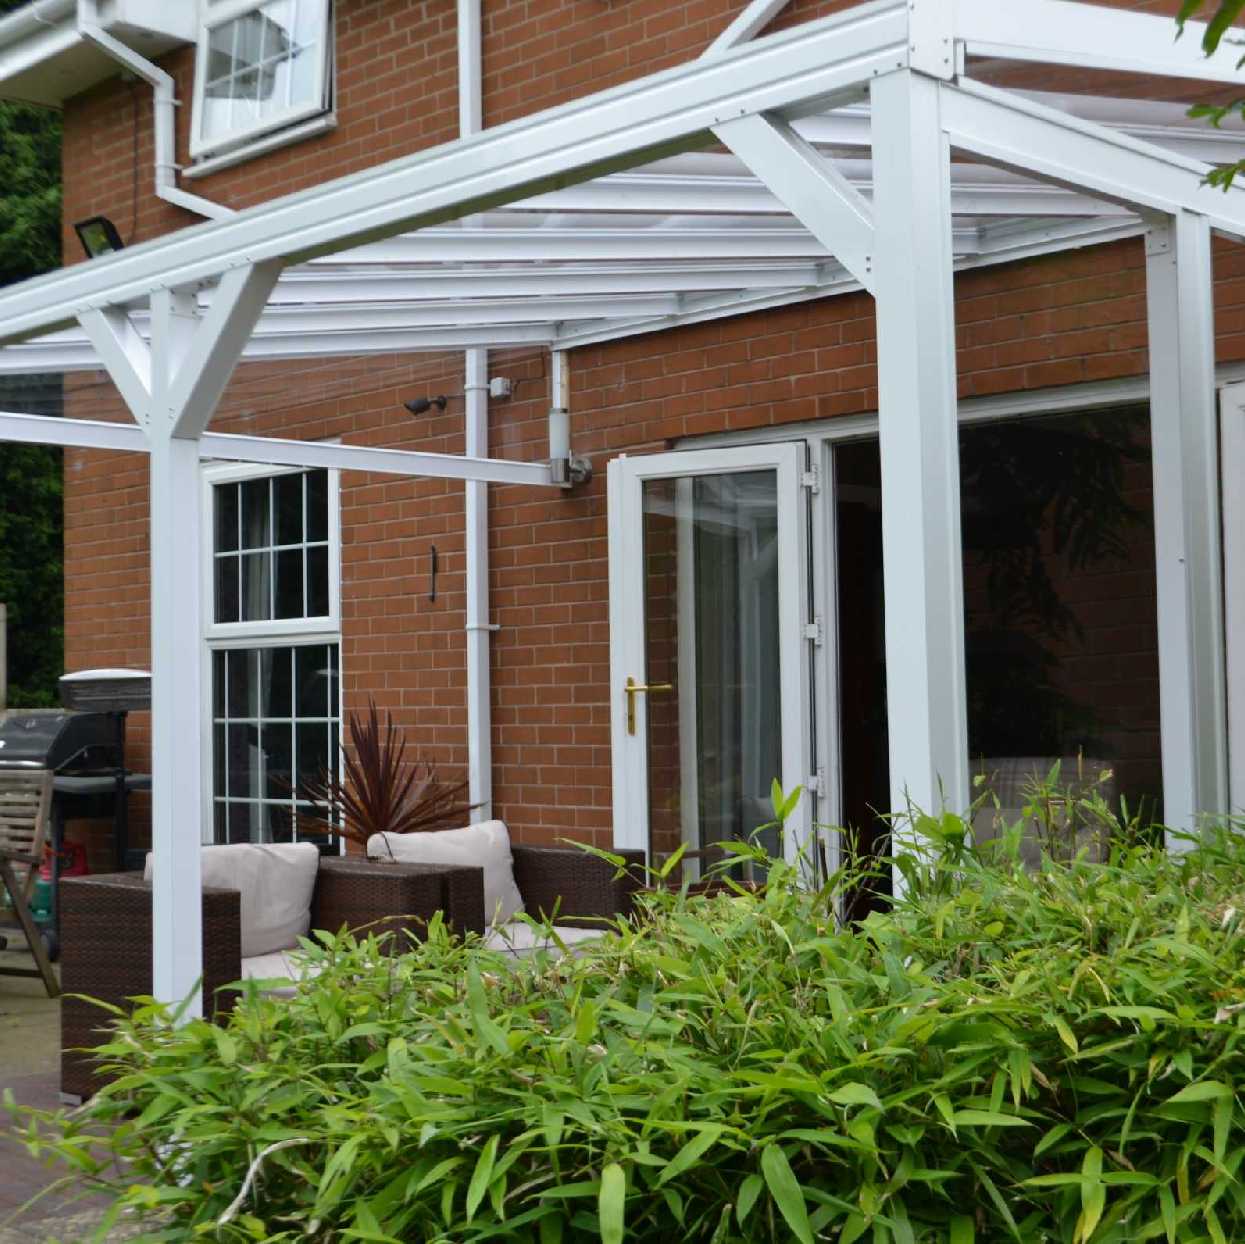 Omega Smart Lean-To Canopy, White with 6mm Glass Clear Plate Polycarbonate Glazing - 6.3m (W) x 2.5m (P), (4) Supporting Posts from Omega Build